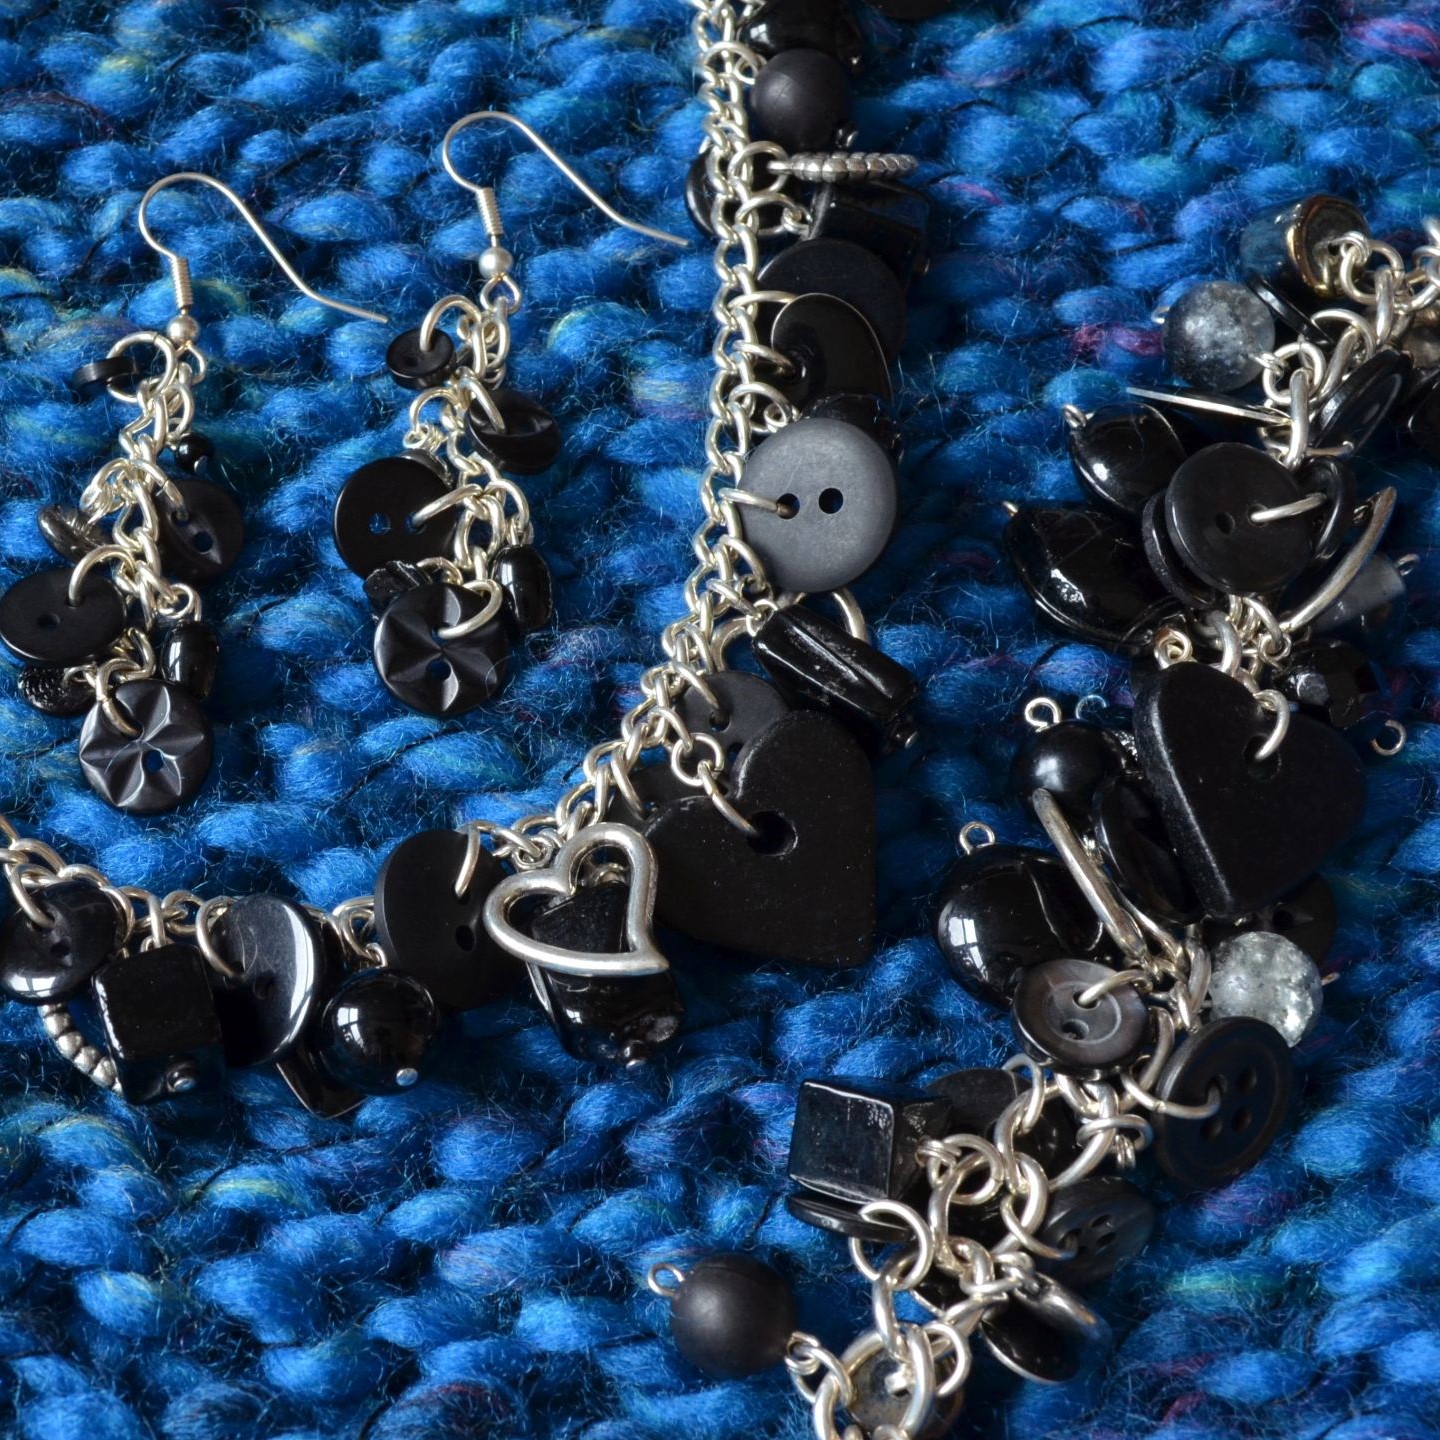 Black Button, Bead & Charm Heart Necklace